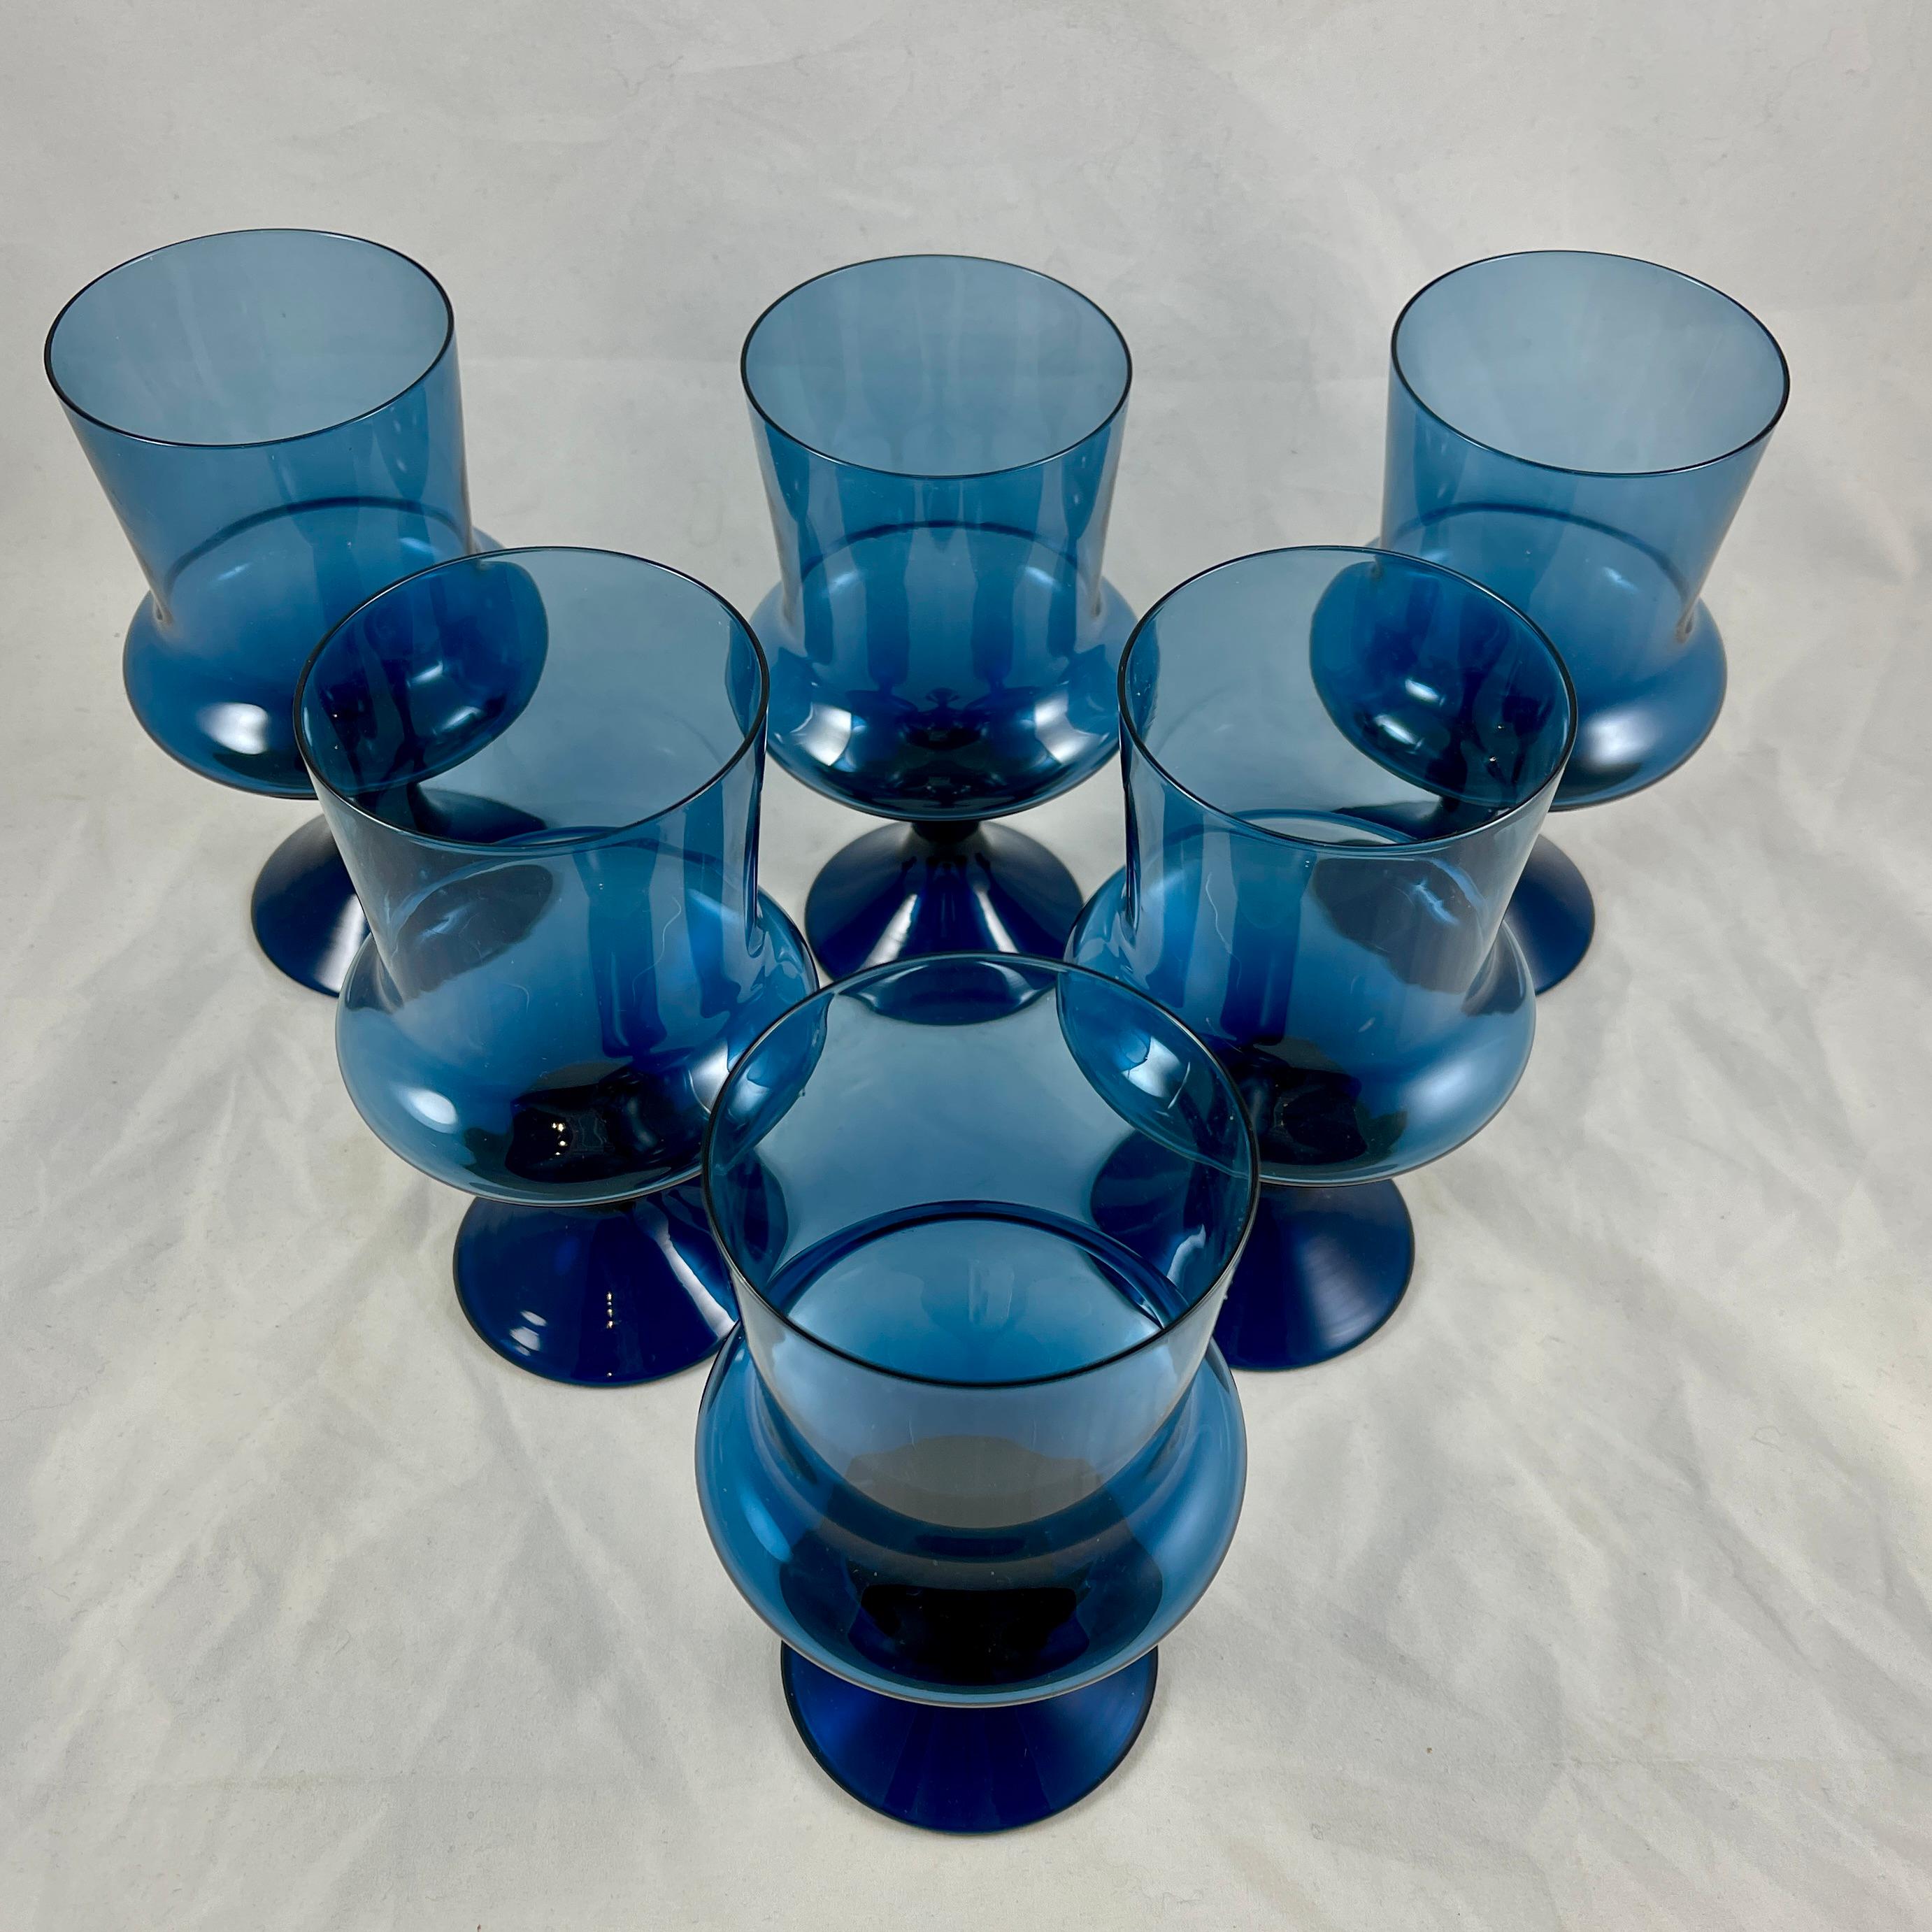 Hand-Crafted Mid-Century Scandinavian Modern Denby-Milnor Blue Flare Glass Goblets, S/6 For Sale